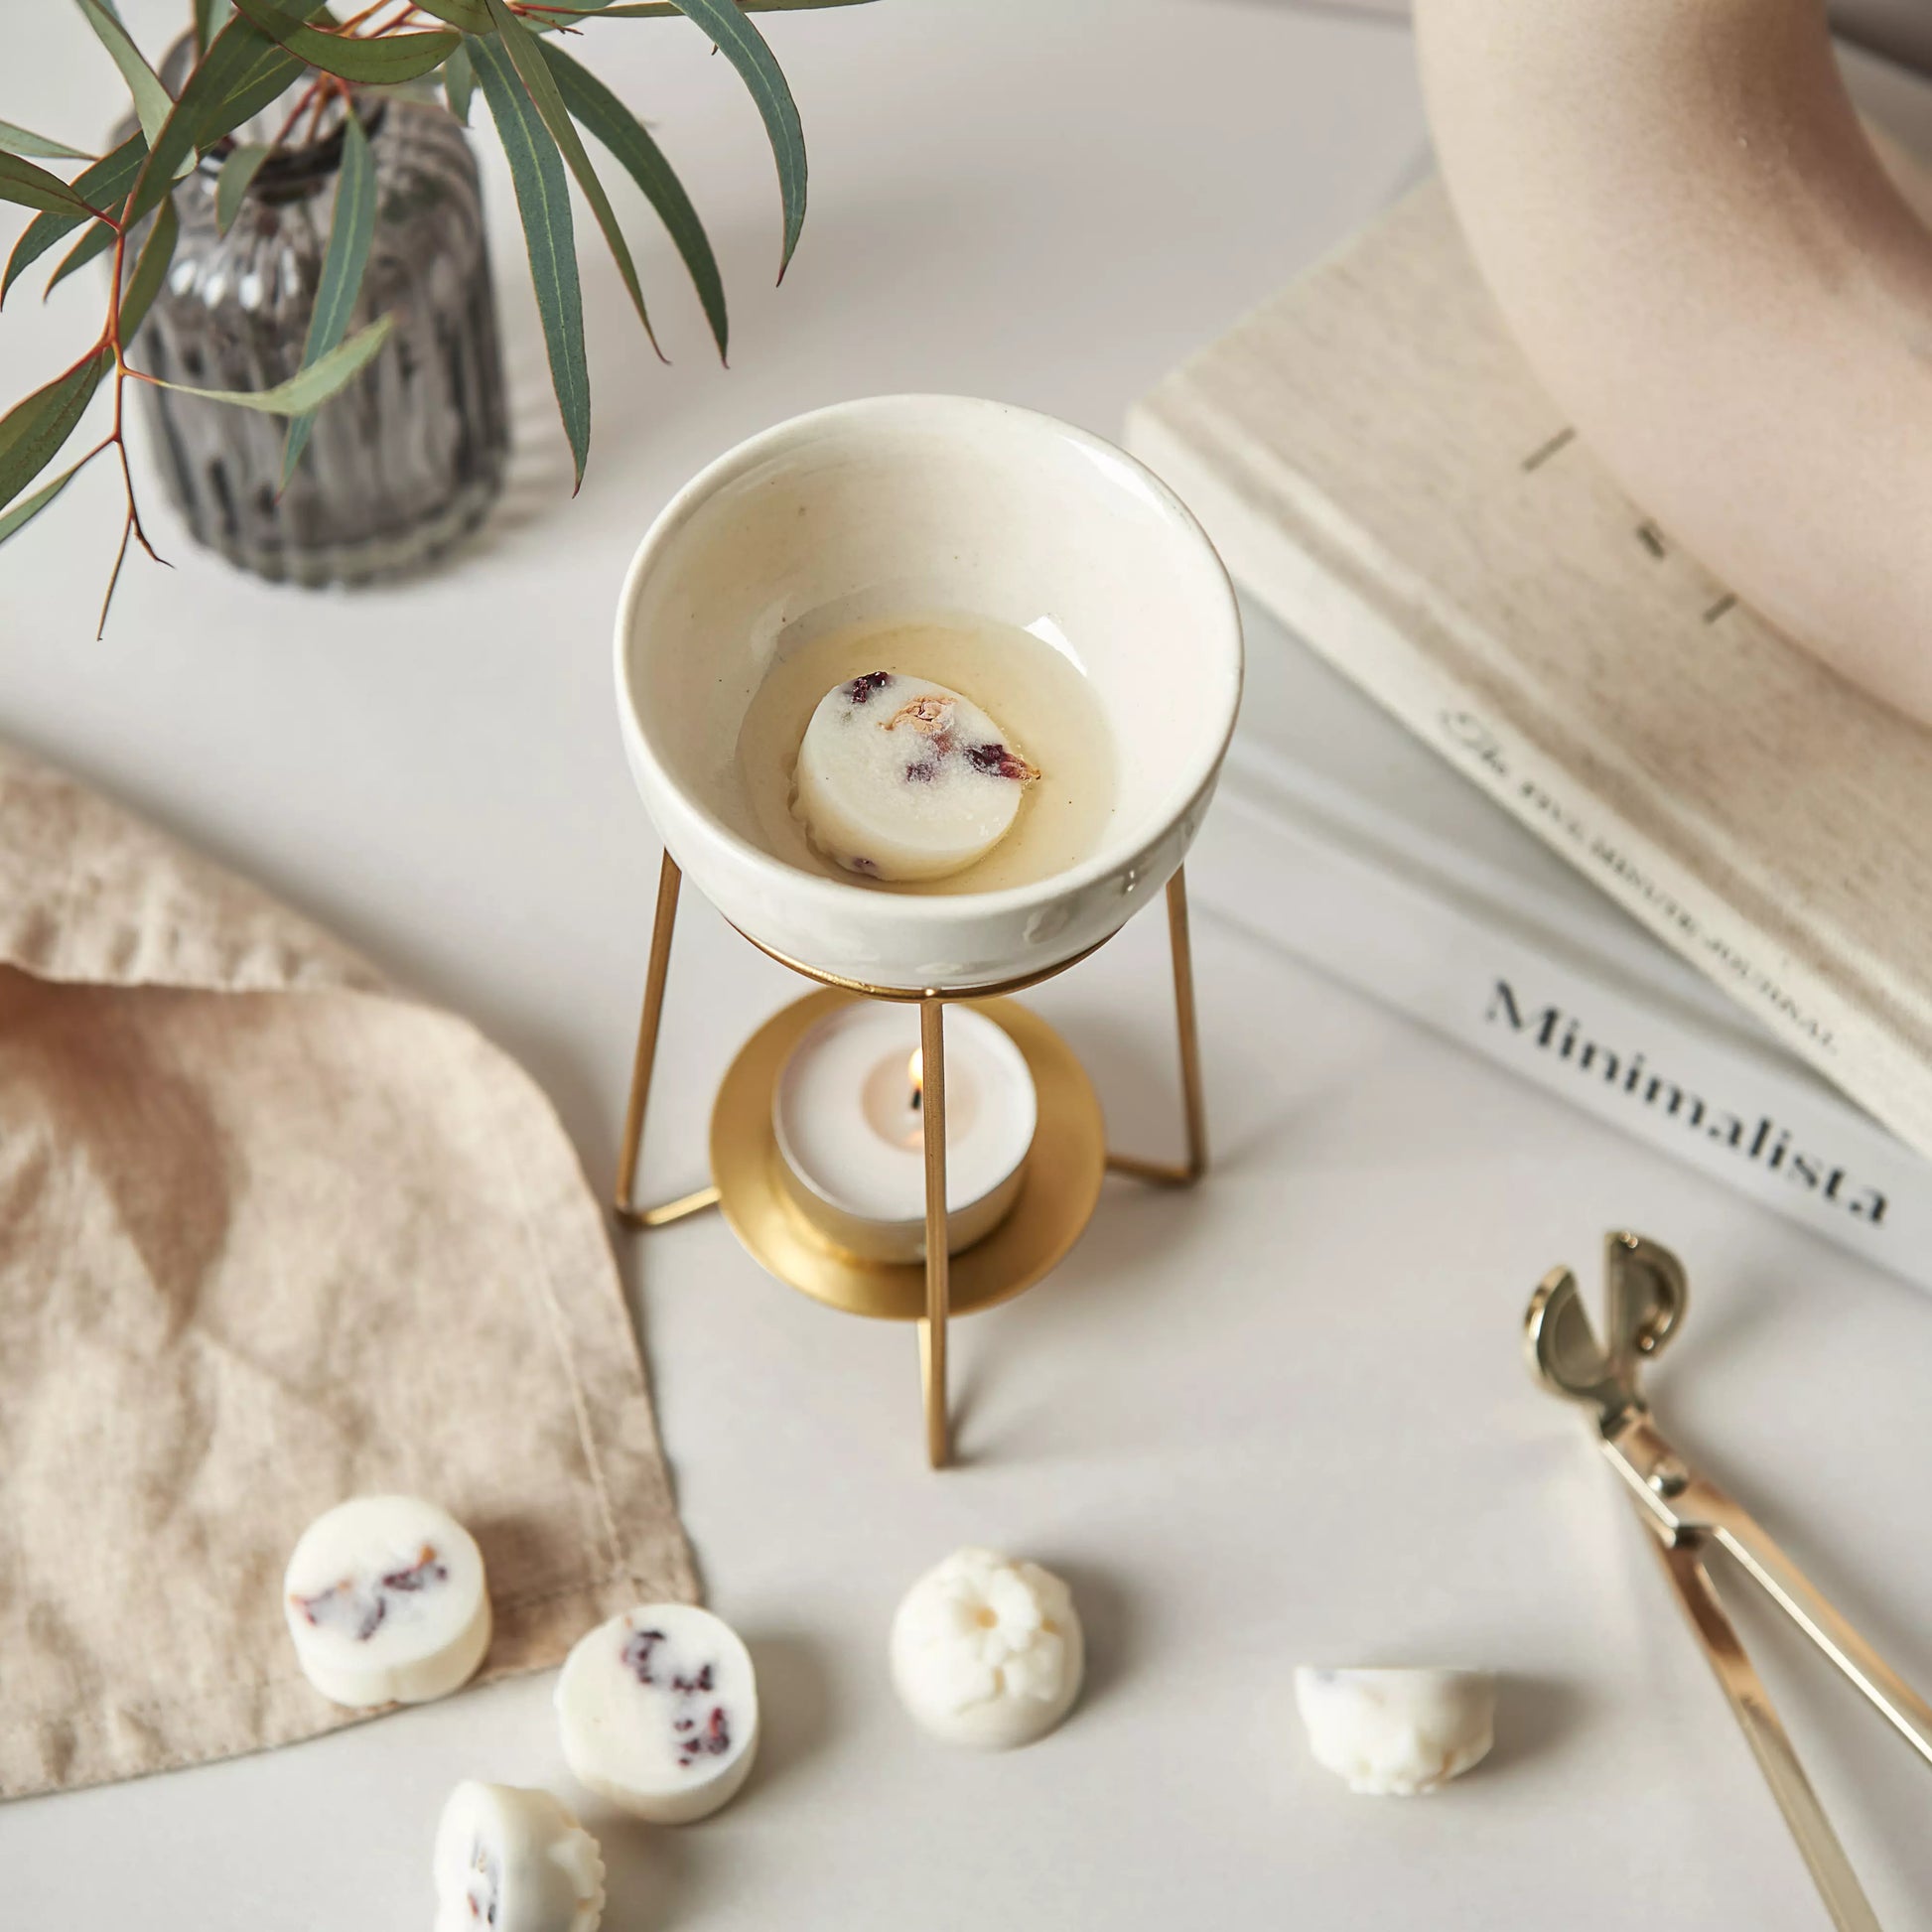 Our Cherry Blossom Wax Melts slowly melt in our bronze wax warmer, heated by a tea light beneath it.